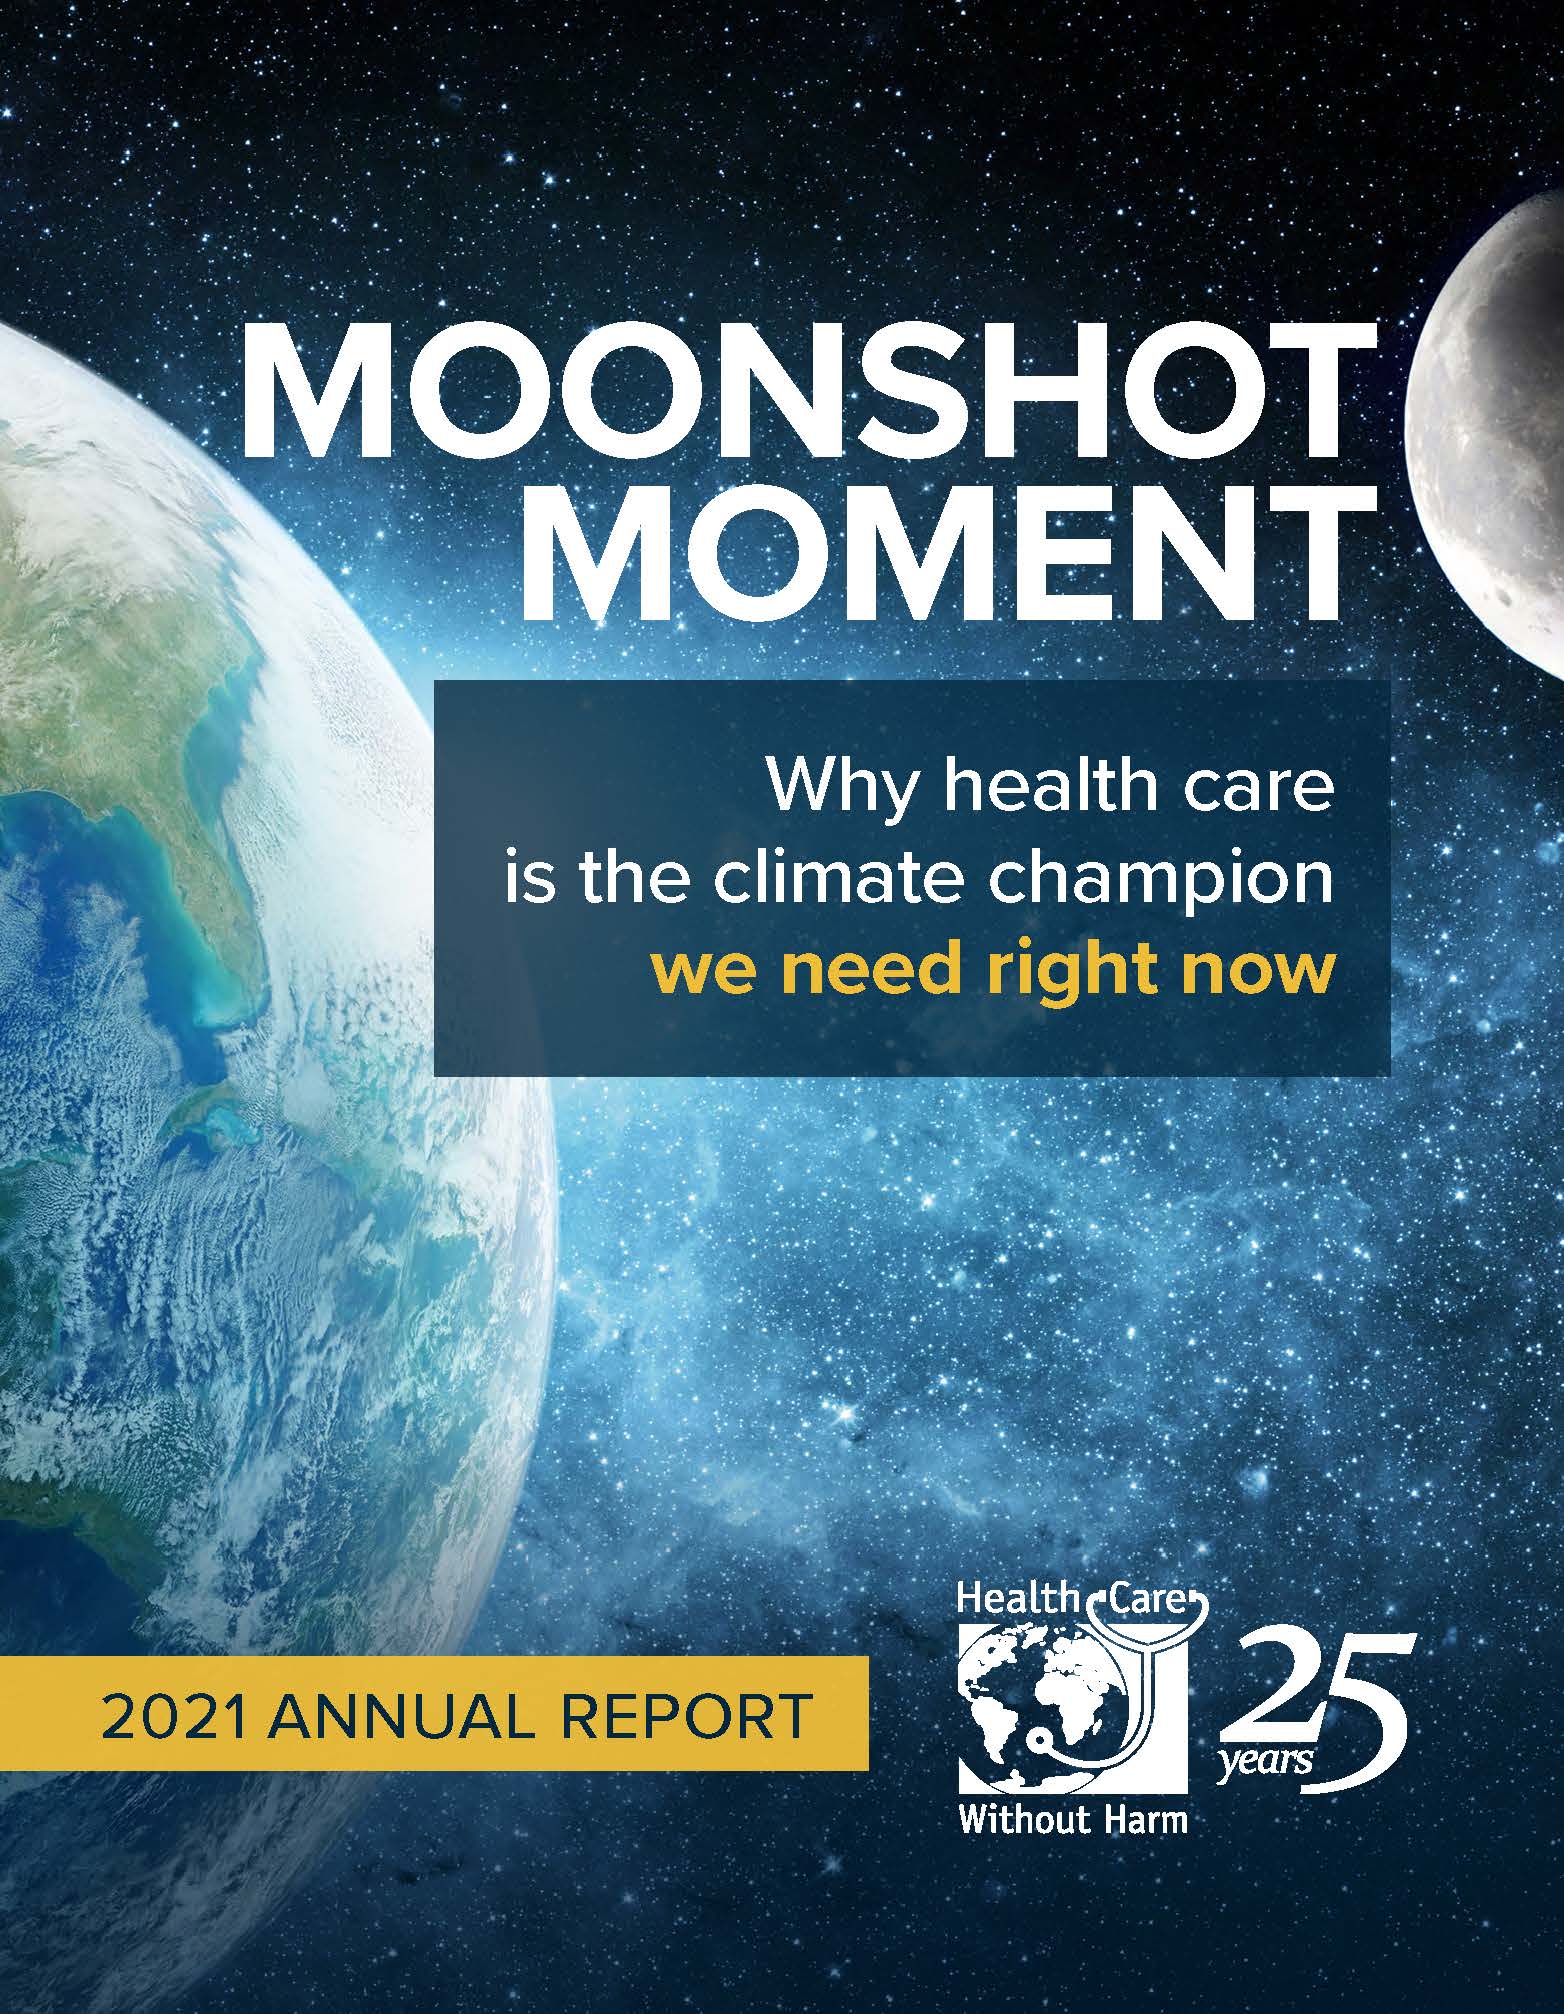 Health Care Without Harm's 2021 annual report